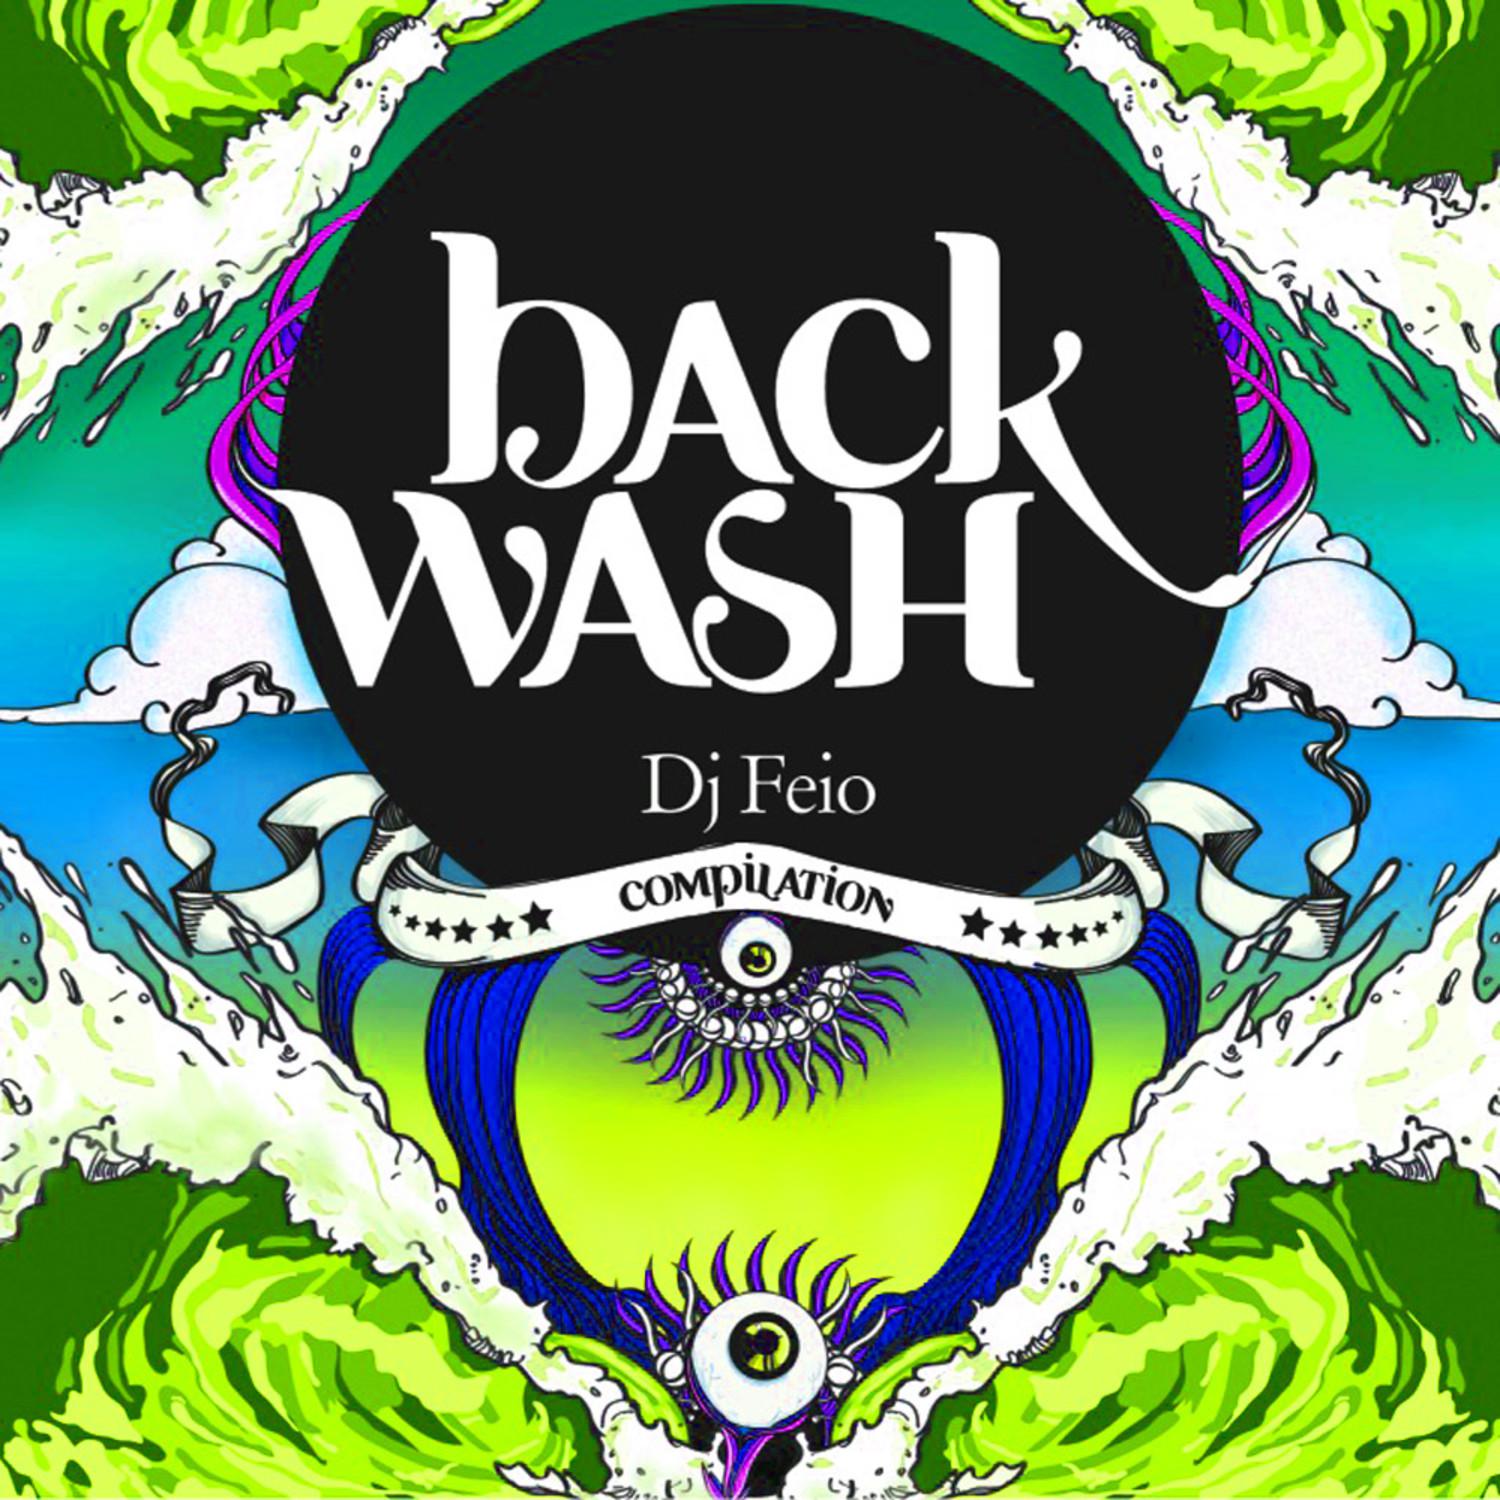 Backwash Compiled by DJ Feio (Part 2)